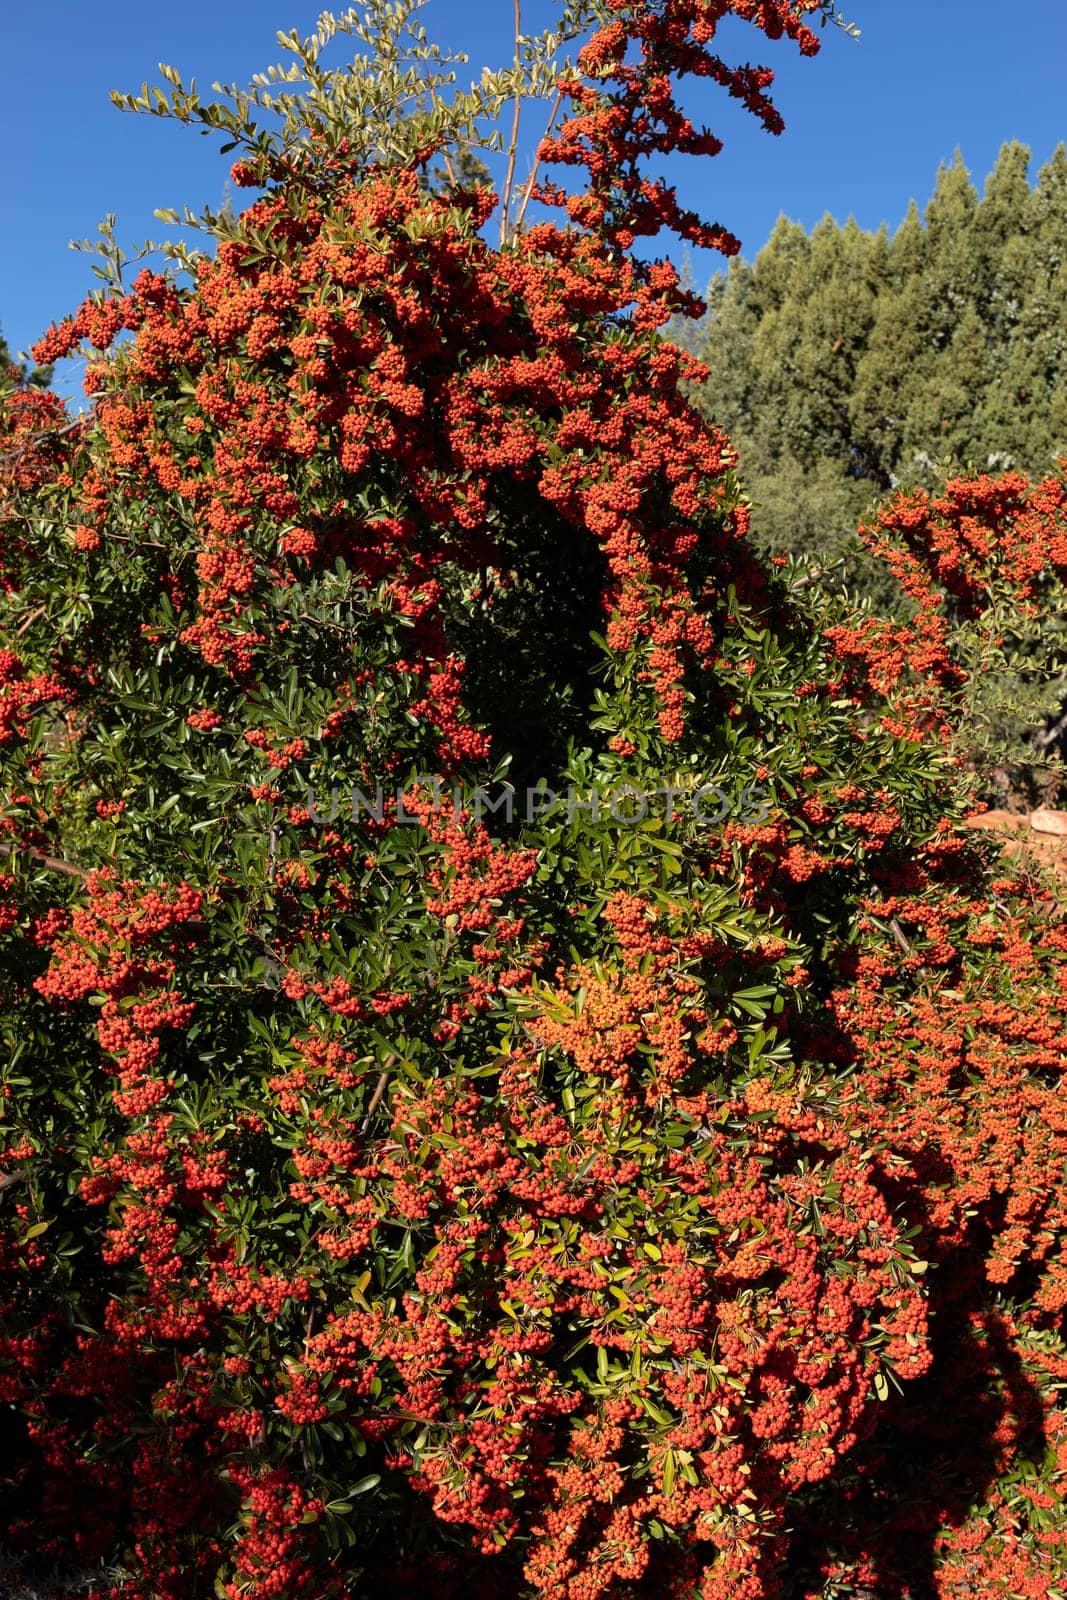 Pyracantha Orange Red Berries And Needle Like Thorns, Firethorn. Evergreen Shrub In Landscaping, Blue Sky On Background. Rosaceae Family. Plant, Gardening Or Landscape Design. Vertical Plane